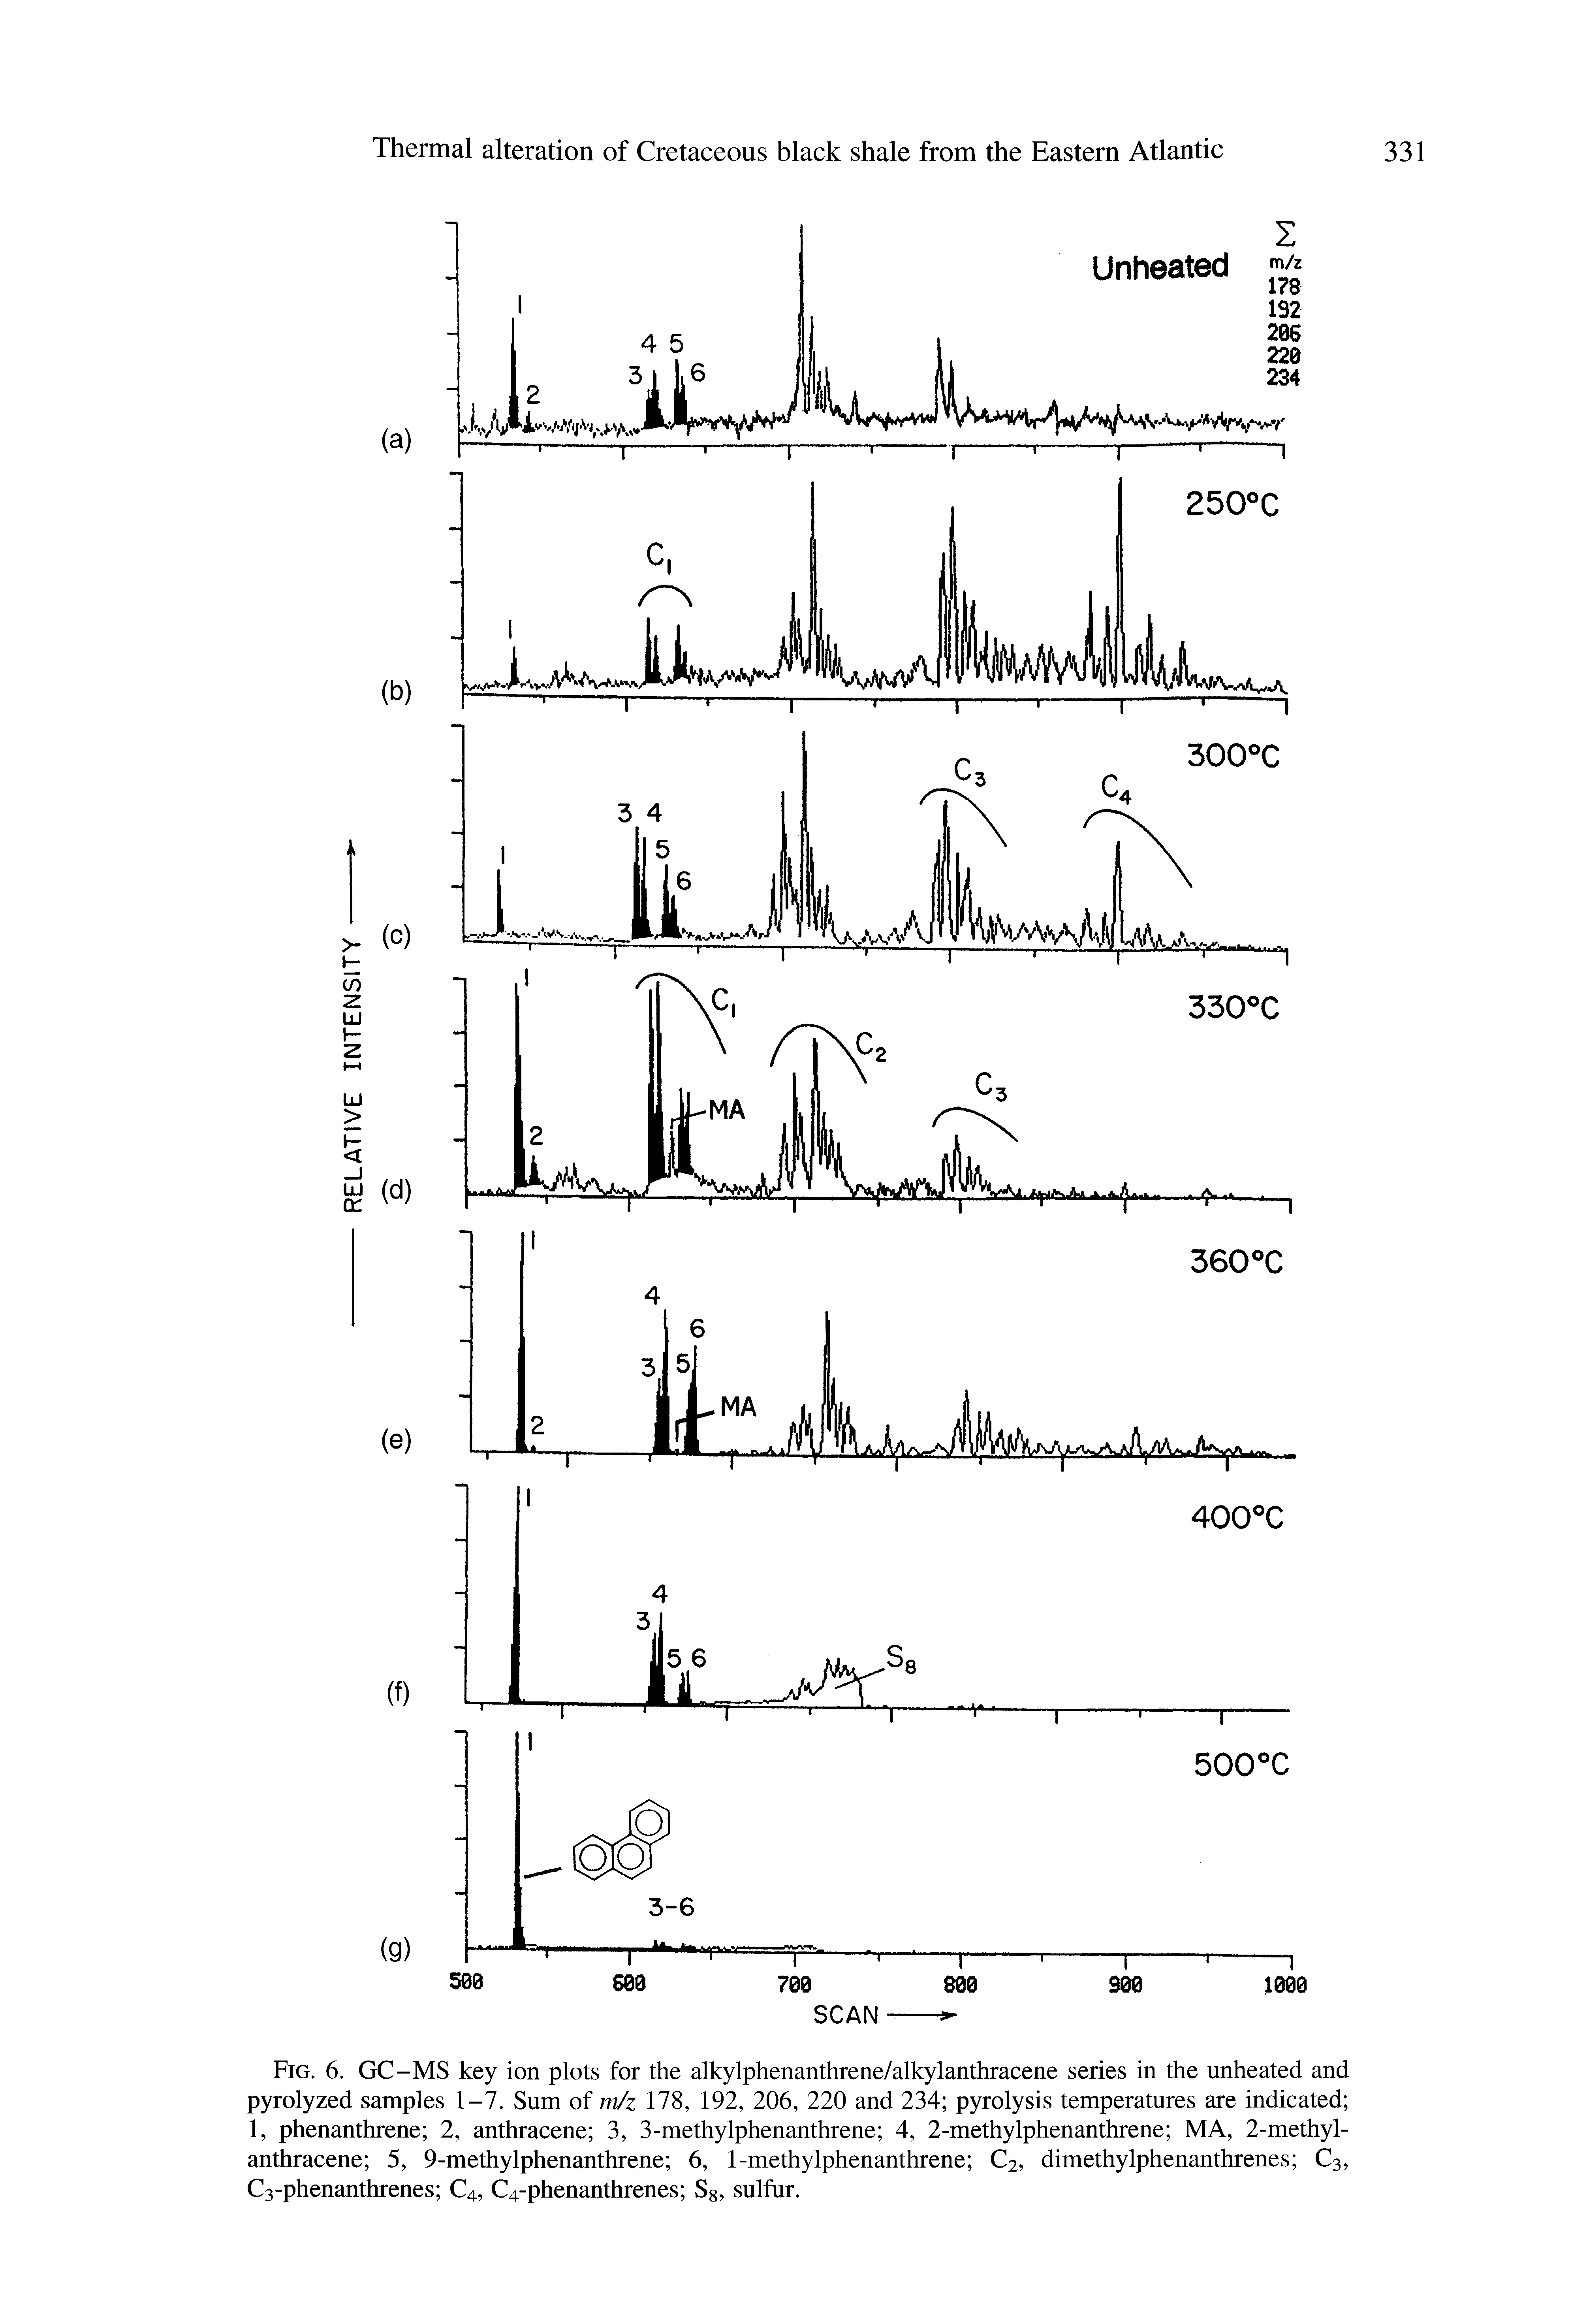 Fig. 6. GC-MS key ion plots for the alkylphenanthrene/alkylanthracene series in the unheated and pyrolyzed samples 1-7. Sum of m/z 178, 192, 206, 220 and 234 pyrolysis temperatures are indicated 1, phenanthrene 2, anthracene 3, 3-methylphenanthrene 4, 2-methylphenanthrene MA, 2-methyl-anthracene 5, 9-methylphenanthrene 6, 1-methylphenanthrene C2, dimethylphenanthrenes C3, Cs-phenanthrenes C4, C4-phenanthrenes Sg, sulfur.